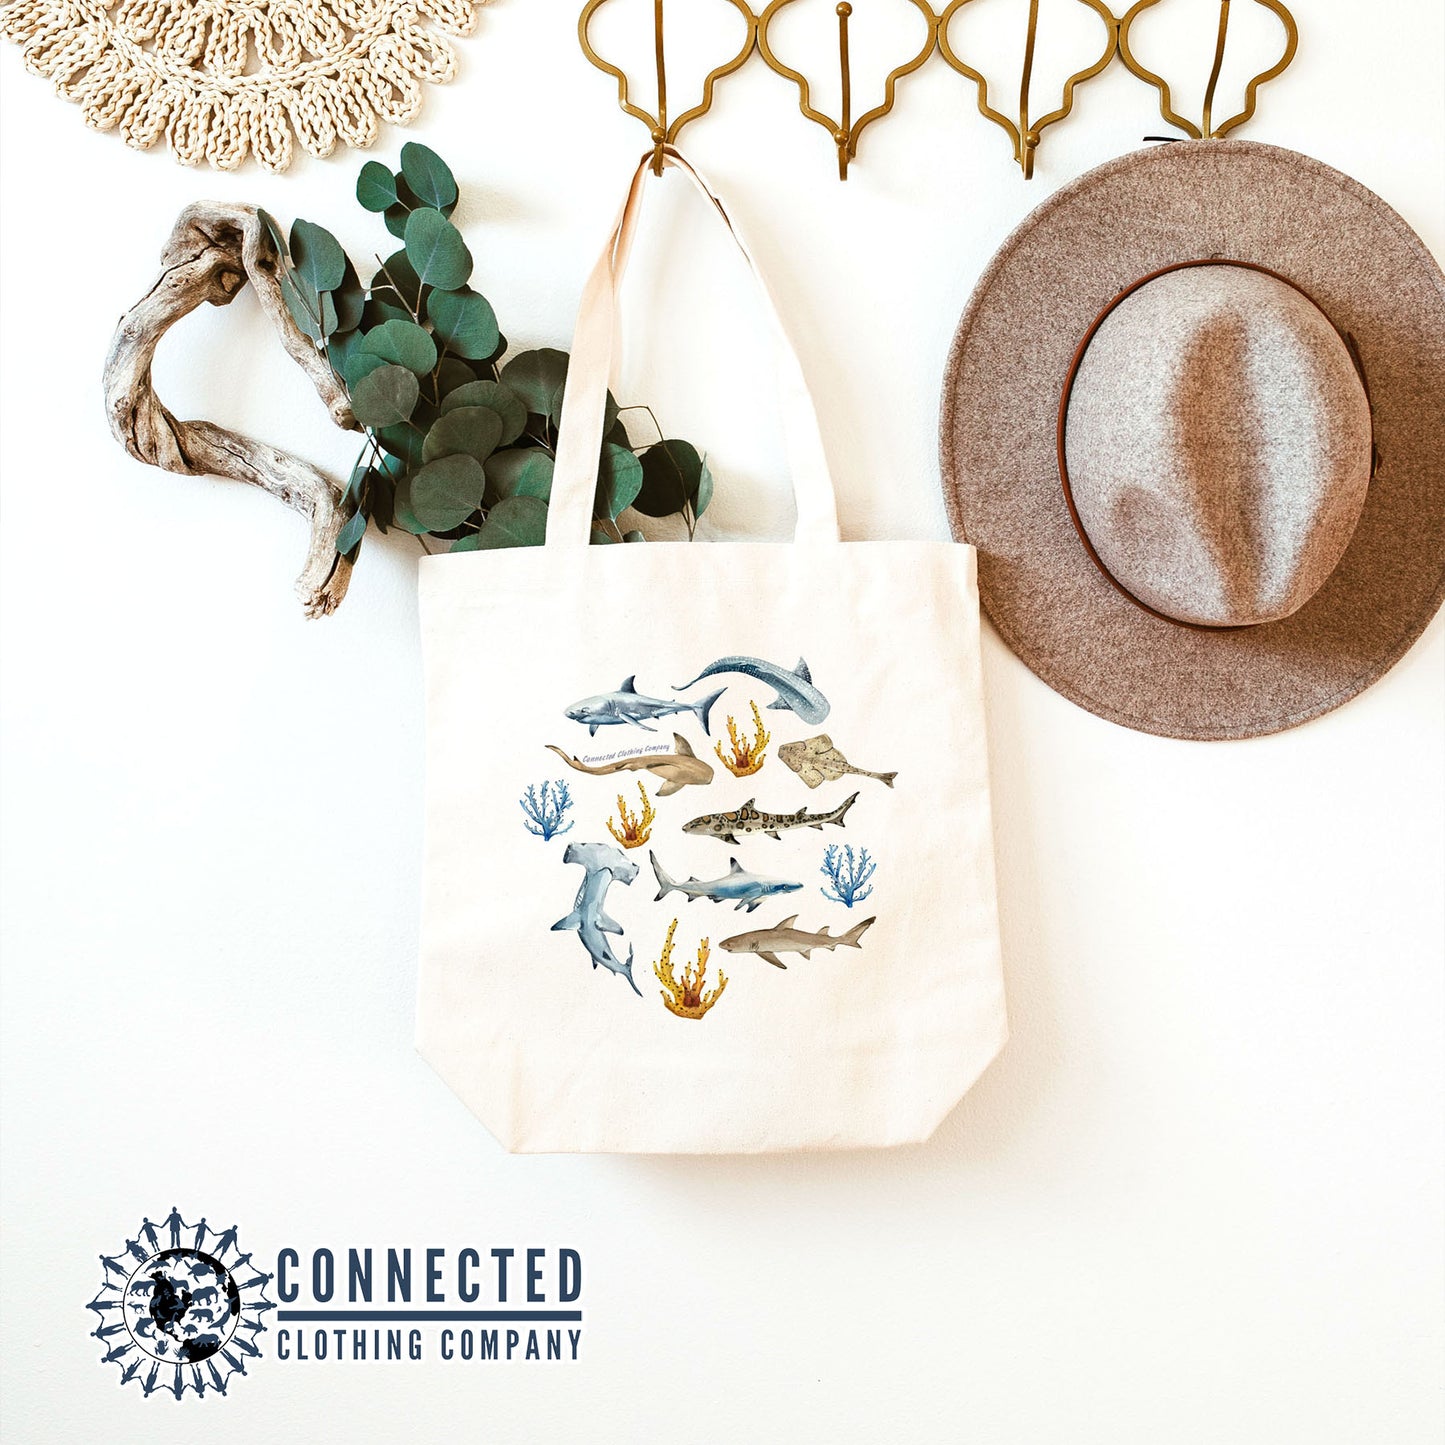 Shark Watercolor Tote - sweetsherriloudesigns - Ethically and Sustainably Made - 10% donated to Oceana shark conservation